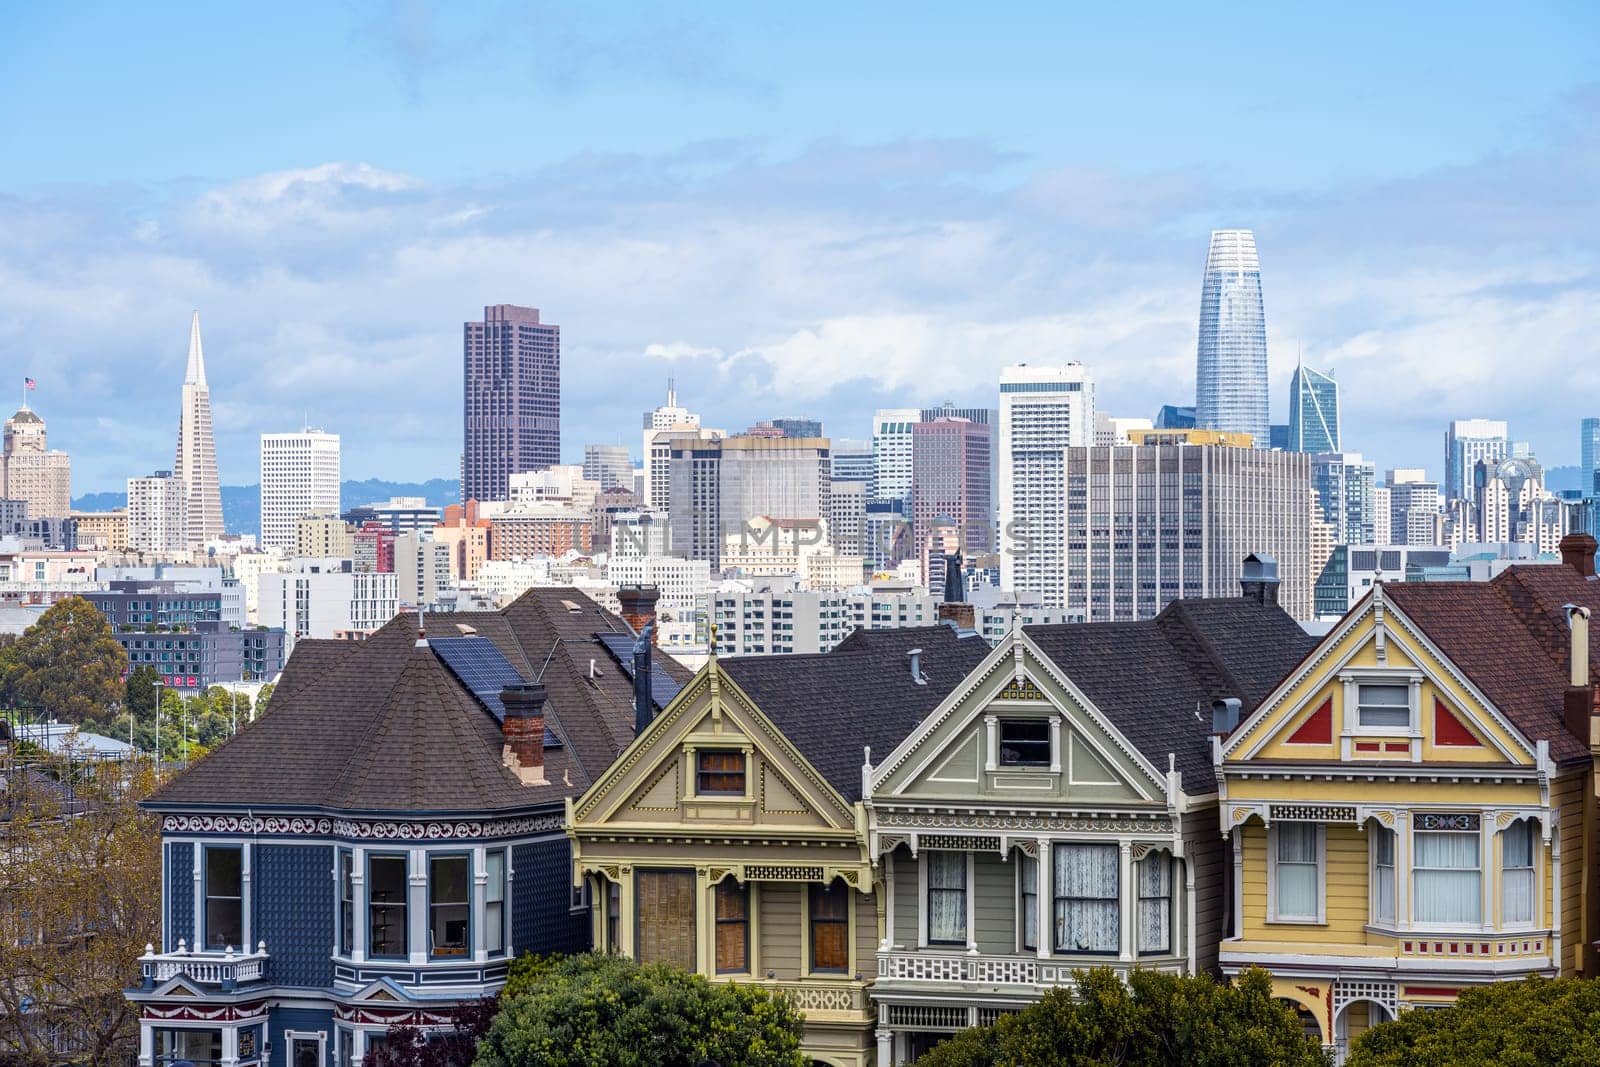 Old victorian houses in San Francisco with the downtown skyline in the back